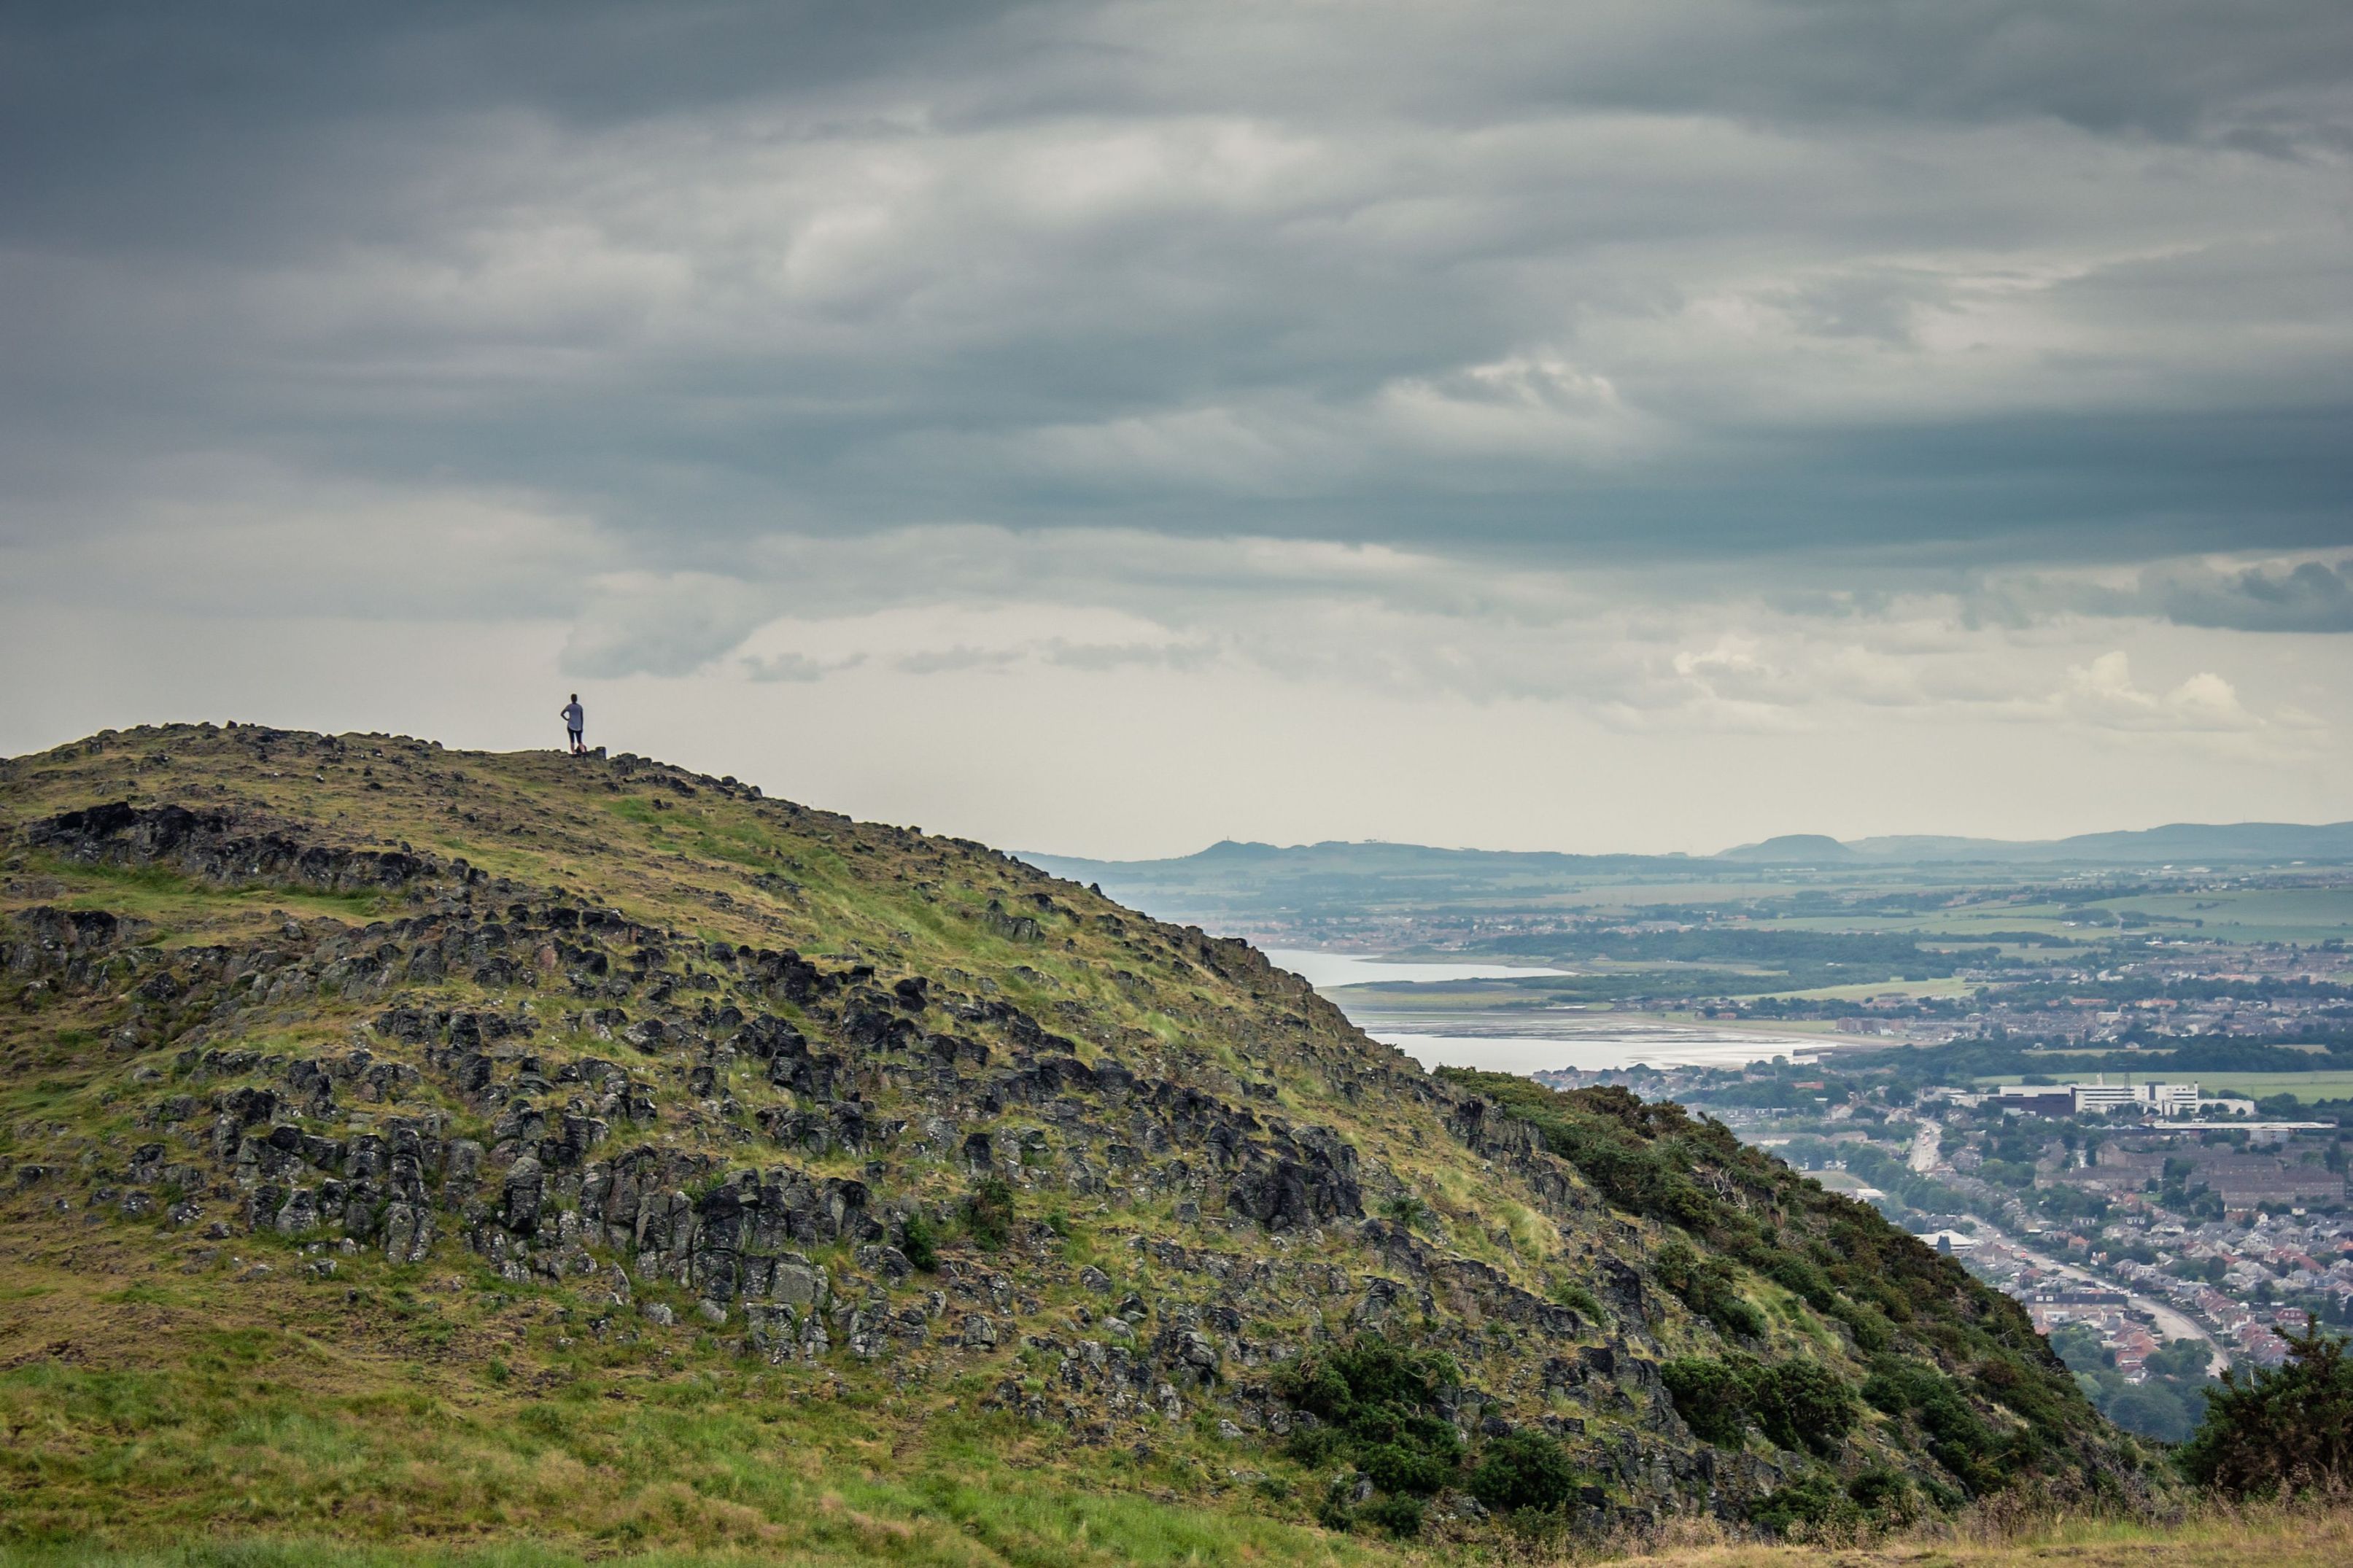 The stunning Arthur’s Seat, looking out over the ocean, North Berwick and the city of Edinburgh on the Seven Summits hike.